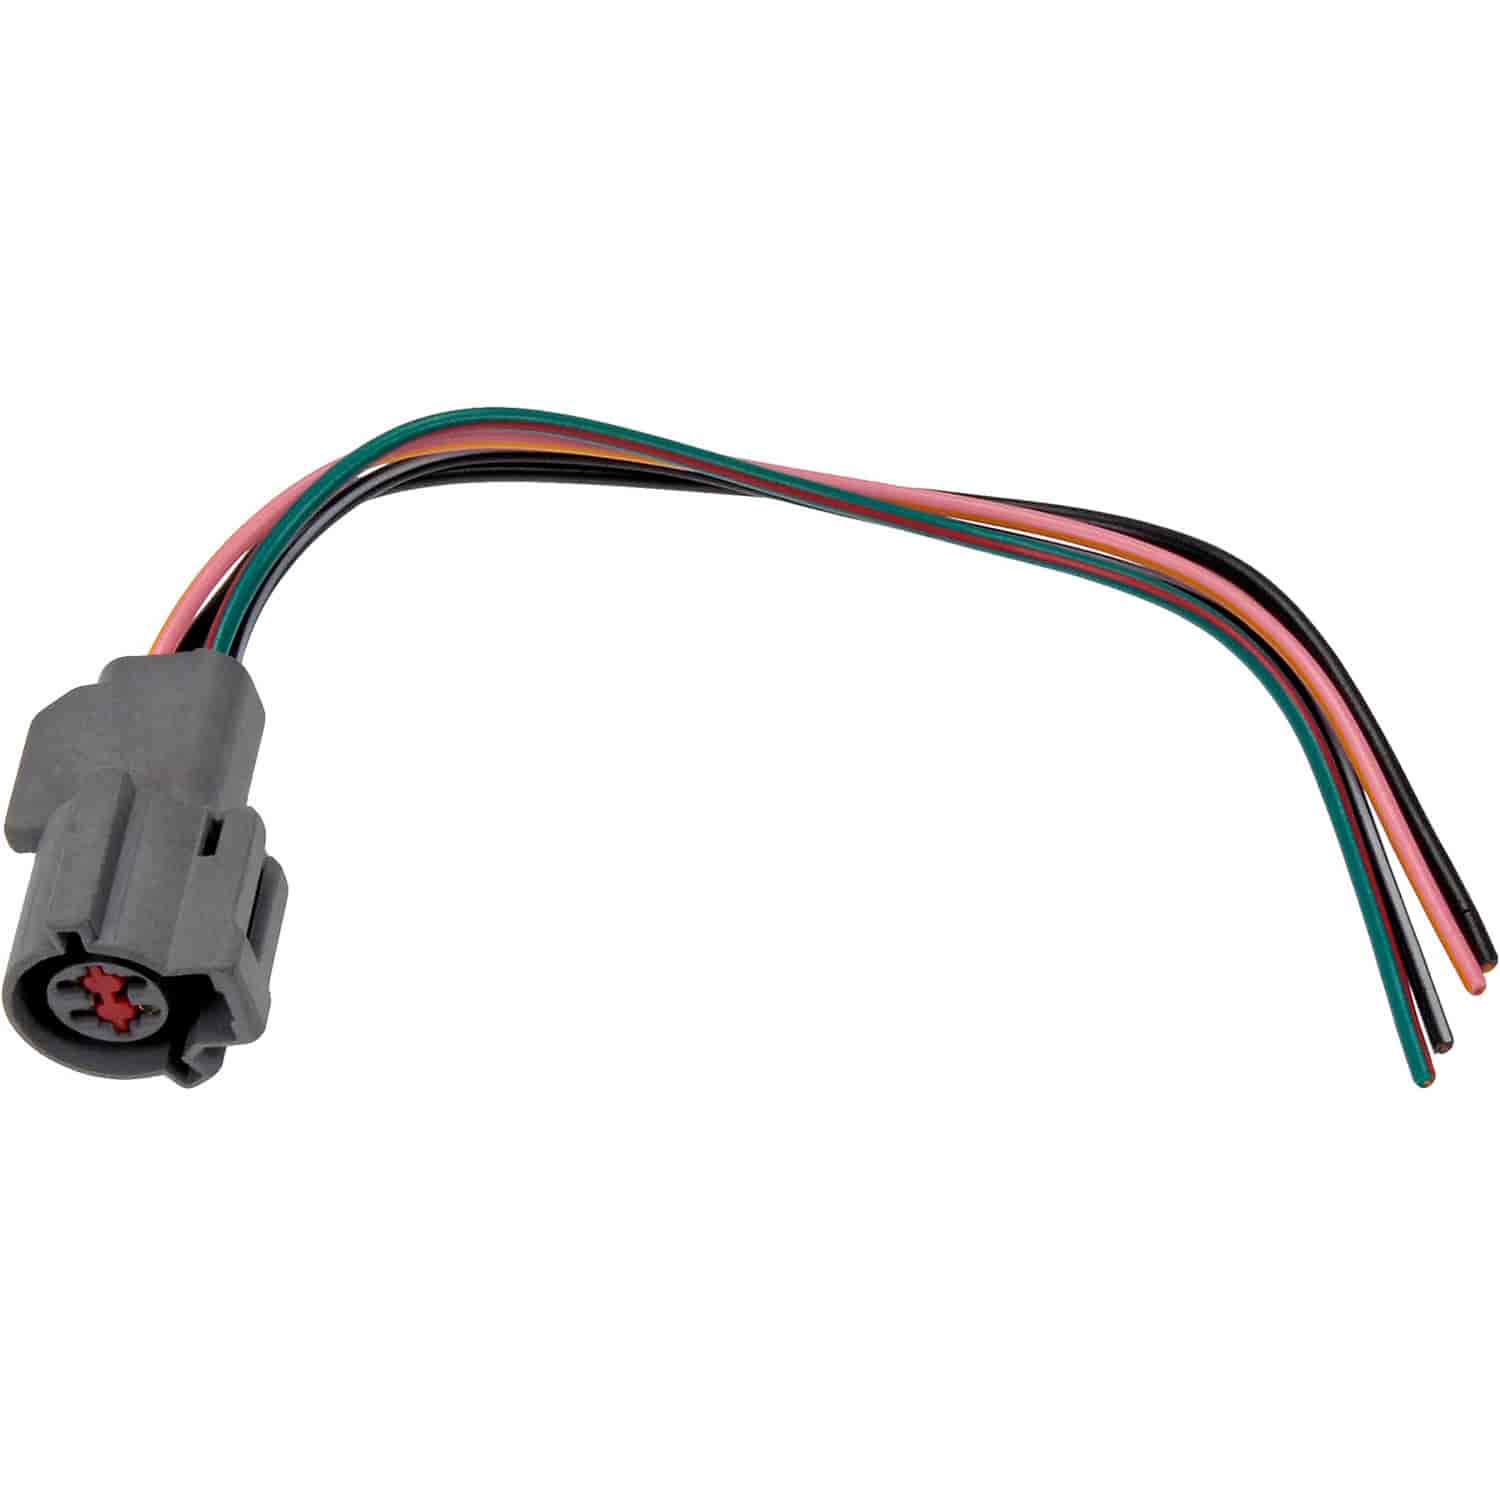 Vehicle Speed Sensor And Oil Pressure Switch Pigtail